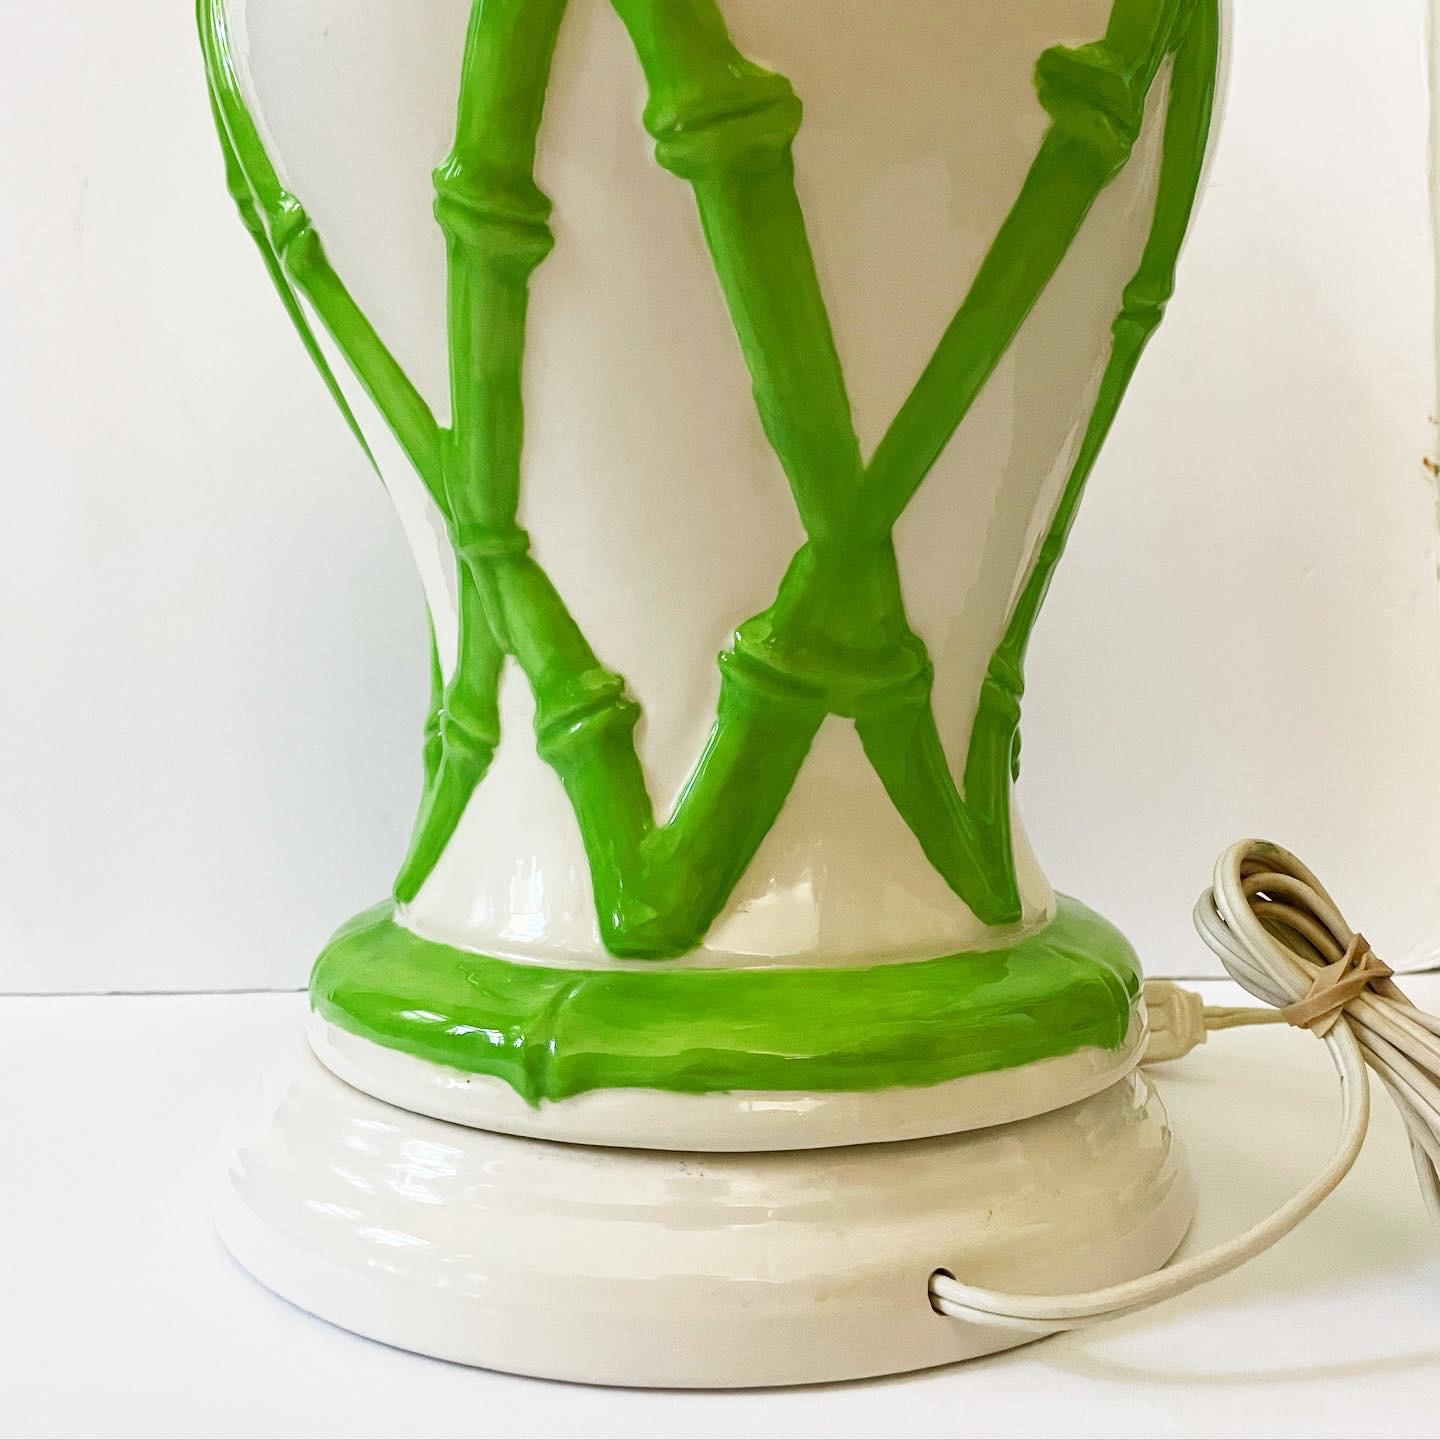 1970s Palm Beach Chic Ceramic Lamp With Bamboo Motif